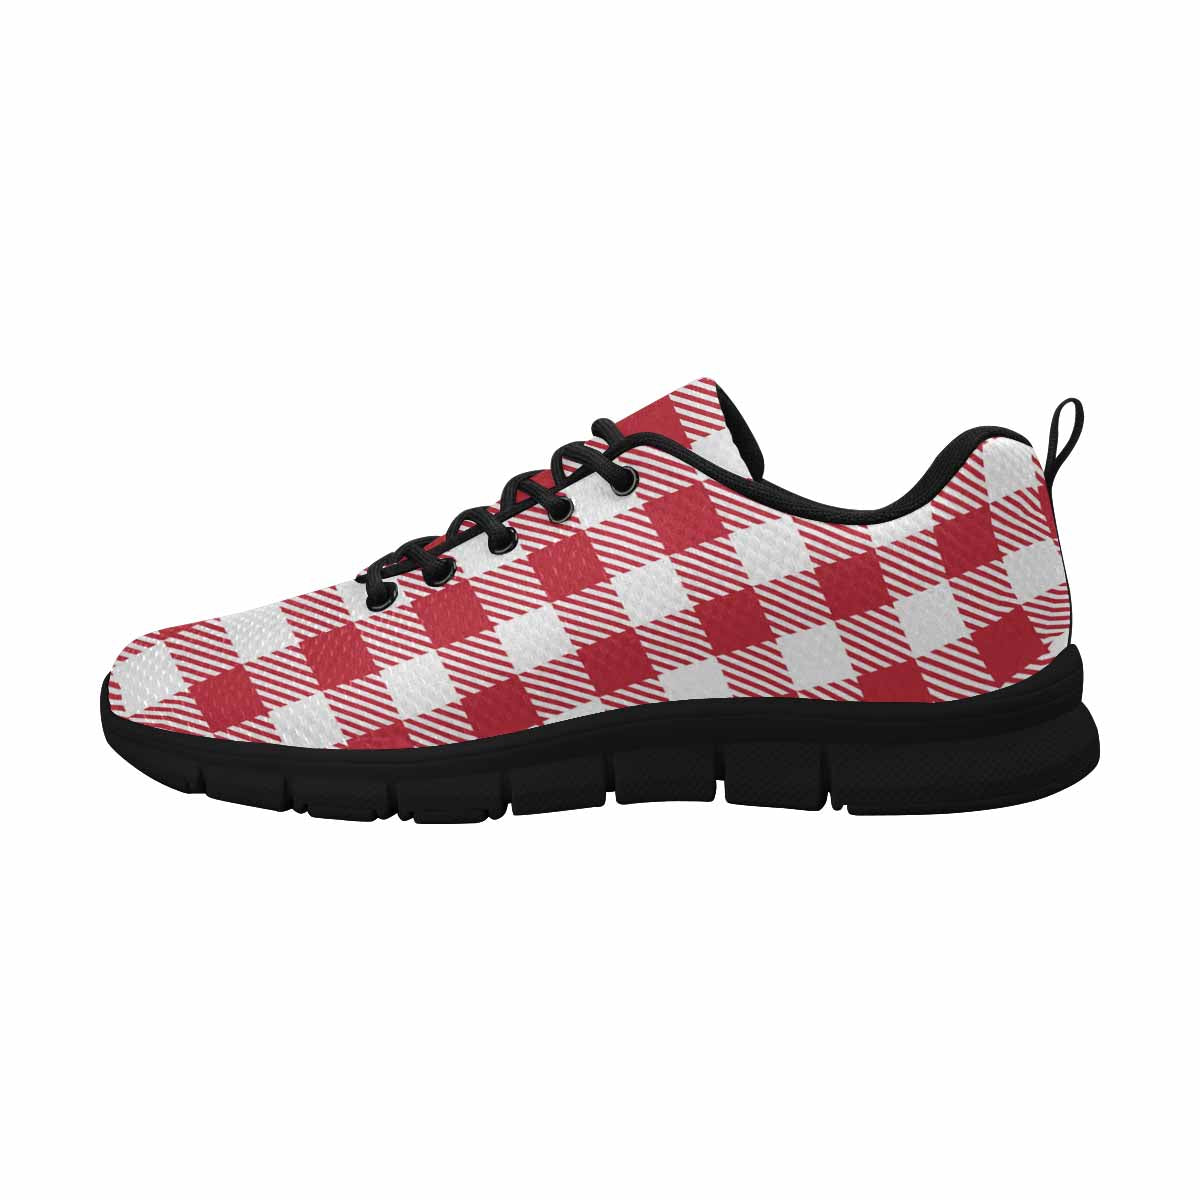 Sneakers For Men, Buffalo Plaid Red And White Running Shoes Dg862